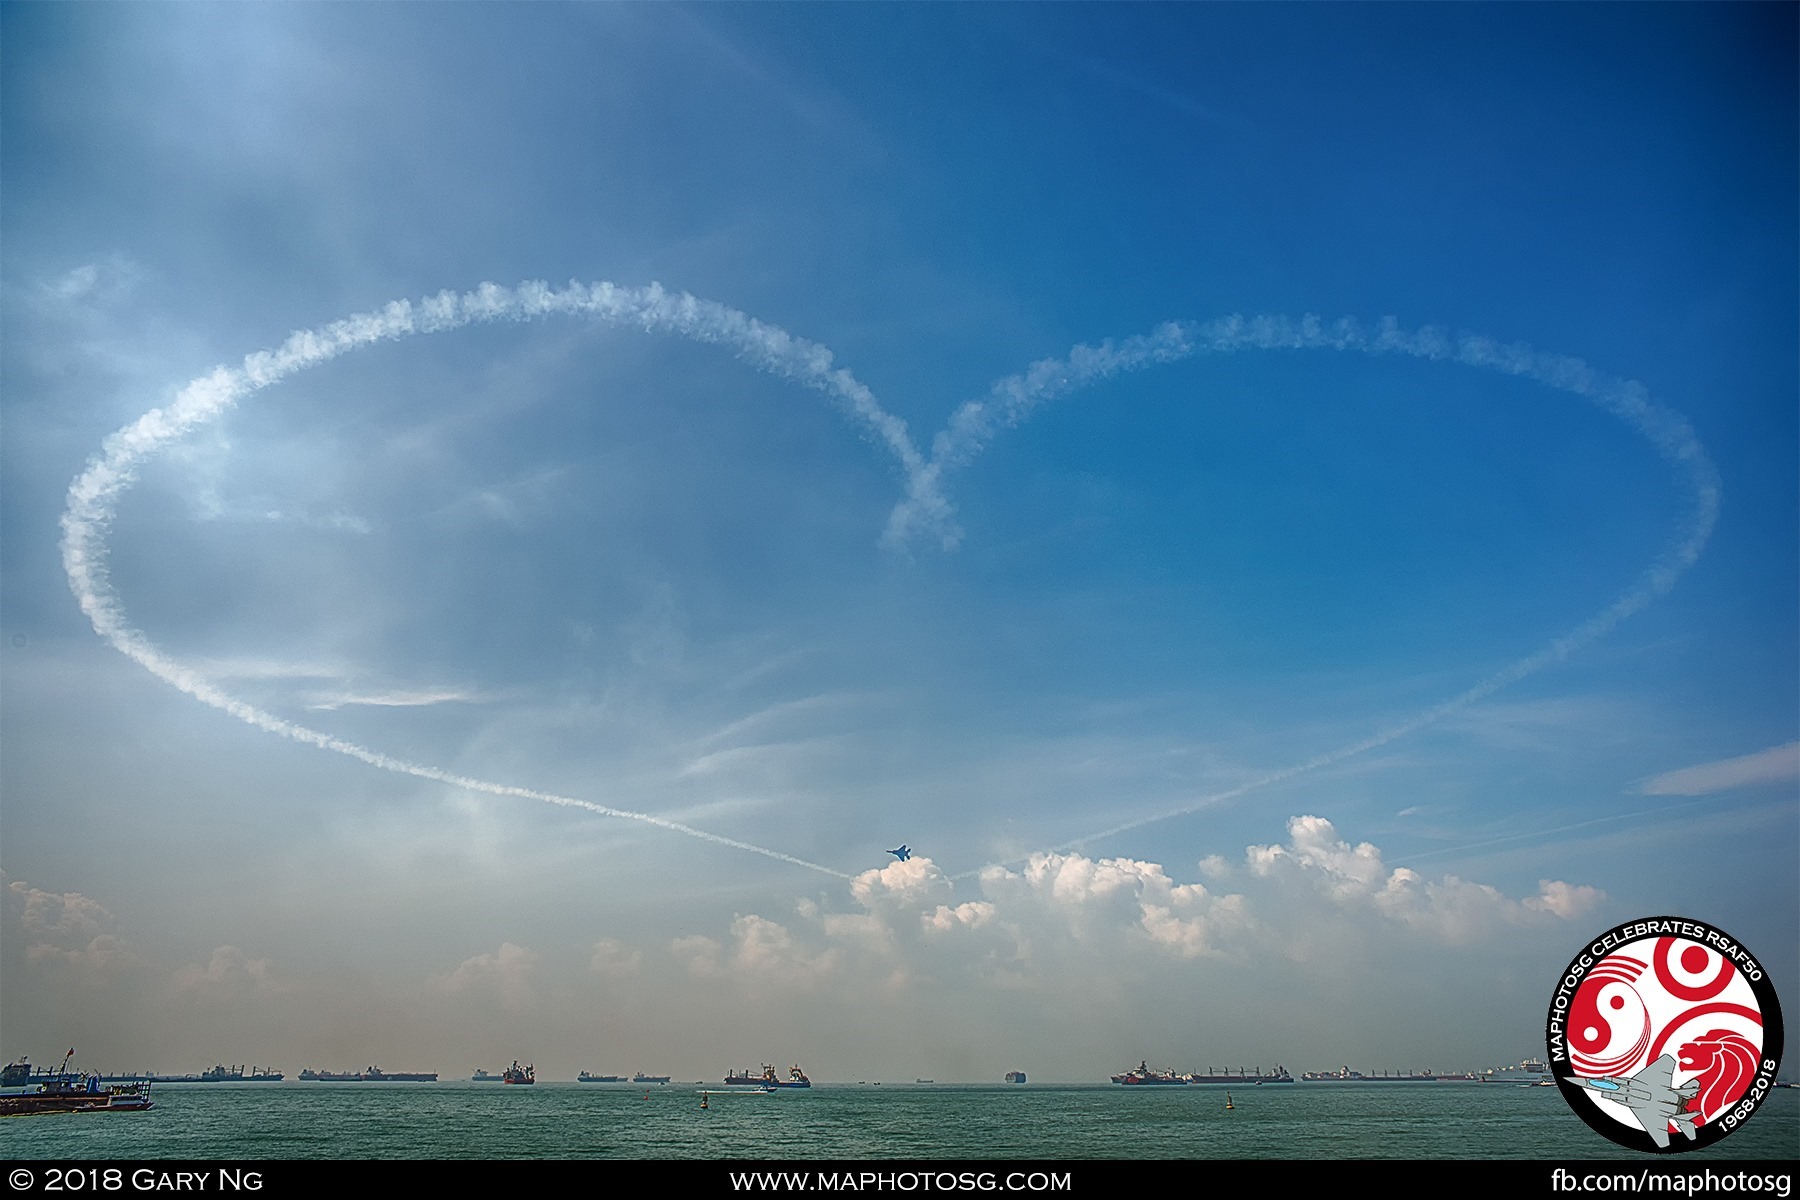 Heart and Knife Edge Pass – Thanking Singaporeans for their support and trust, the two F-16Cs paint a heart with white smoke while the F-15SG showcase the RSAF50 paintwork with a knife edge pass.